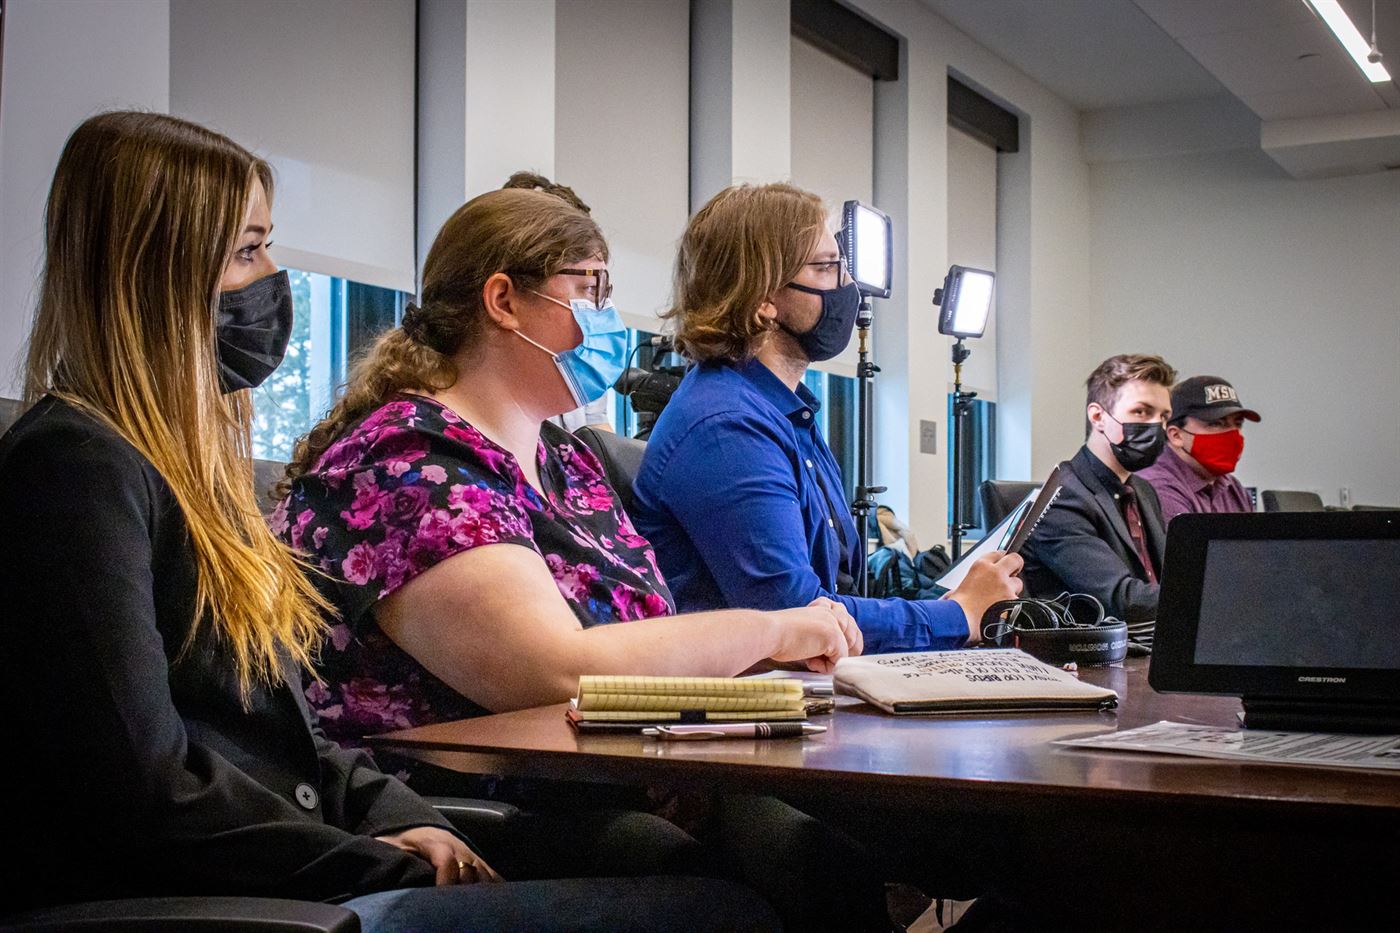 Left to right): Erin Lawlor, Jenna Sundel, Ben Petruk, Matt Bruchez and Louis Biondolillo in a meeting with President Jonathan Koppell in Dinallo Conference Room inside Cole Hall. John LaRosa | The Montclarion